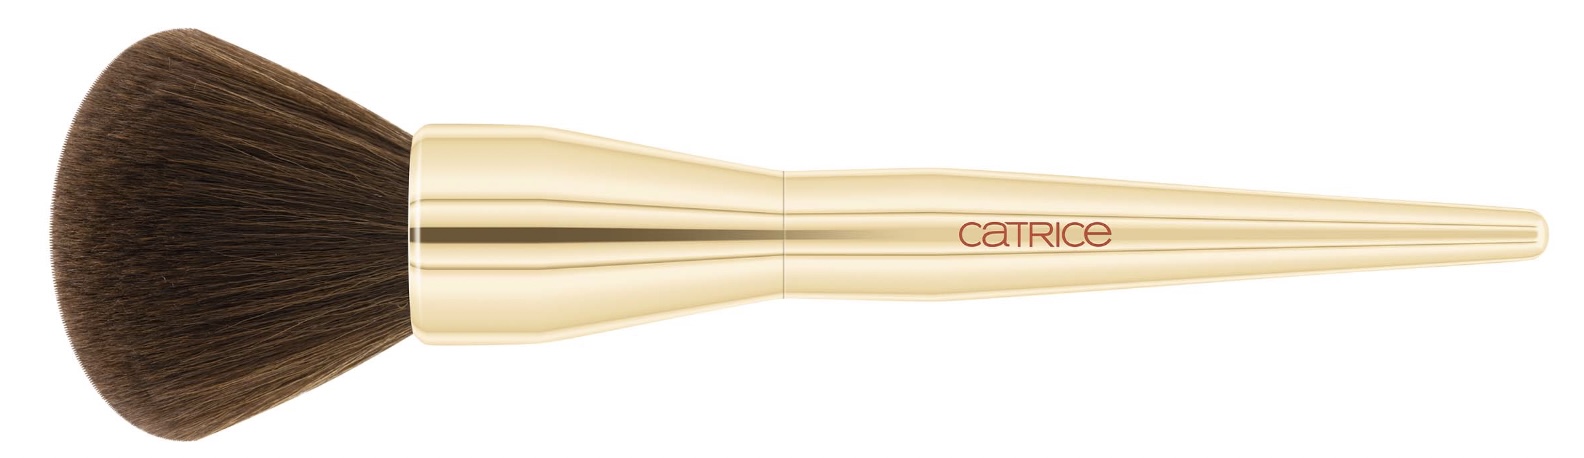 Catrice Fall in Colours Face brush 